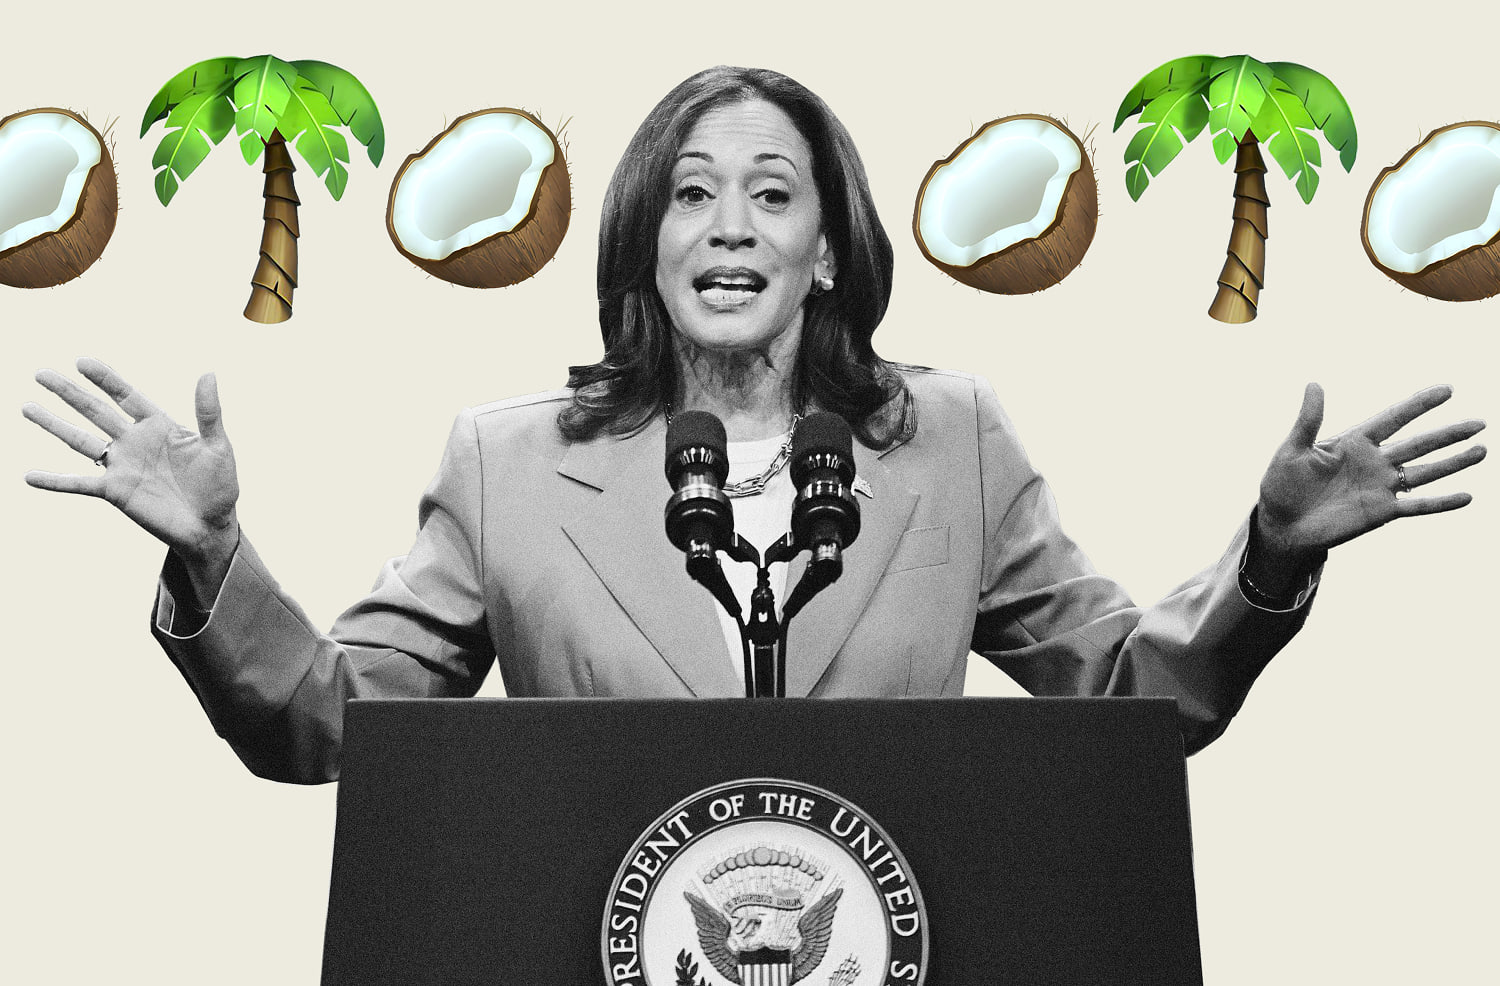 What the Kamala Harris 'coconut tree' meme foreshadows about our political future